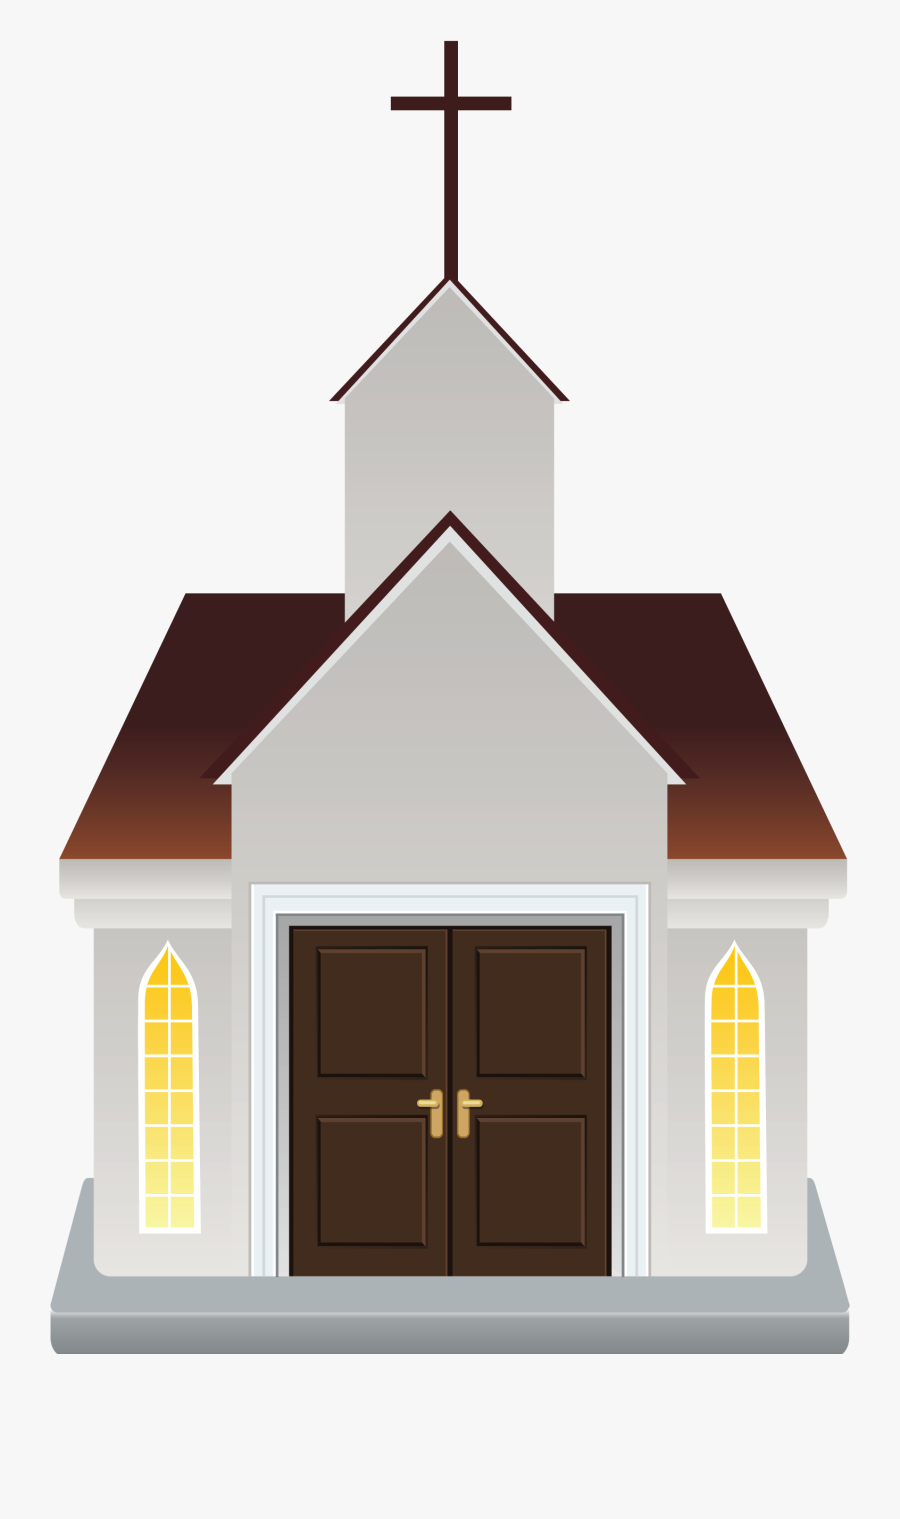 Building Church Cartoon Icon Download Hq Png Clipart - Cartoon Church Building, Transparent Clipart